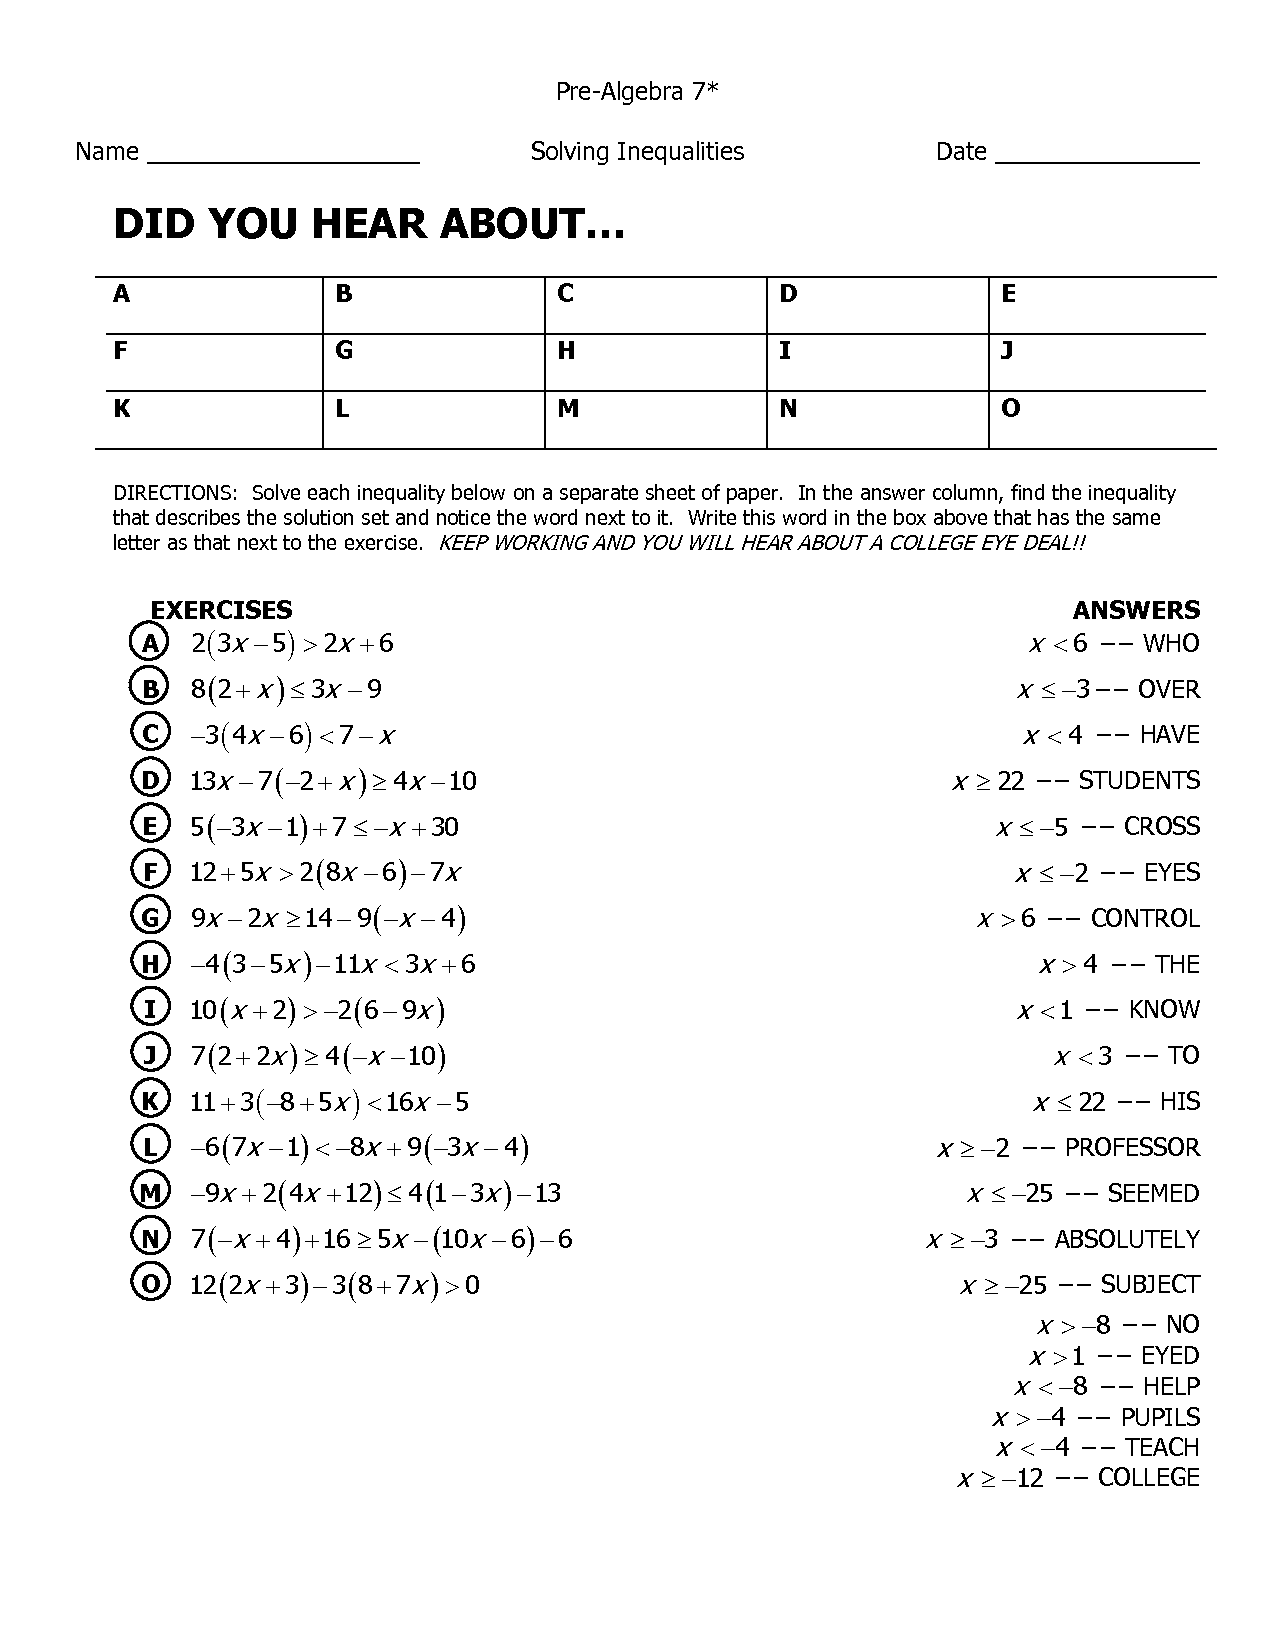 8-best-images-of-did-you-hear-about-worksheet-pre-algebra-answer-key-did-you-hear-about-math